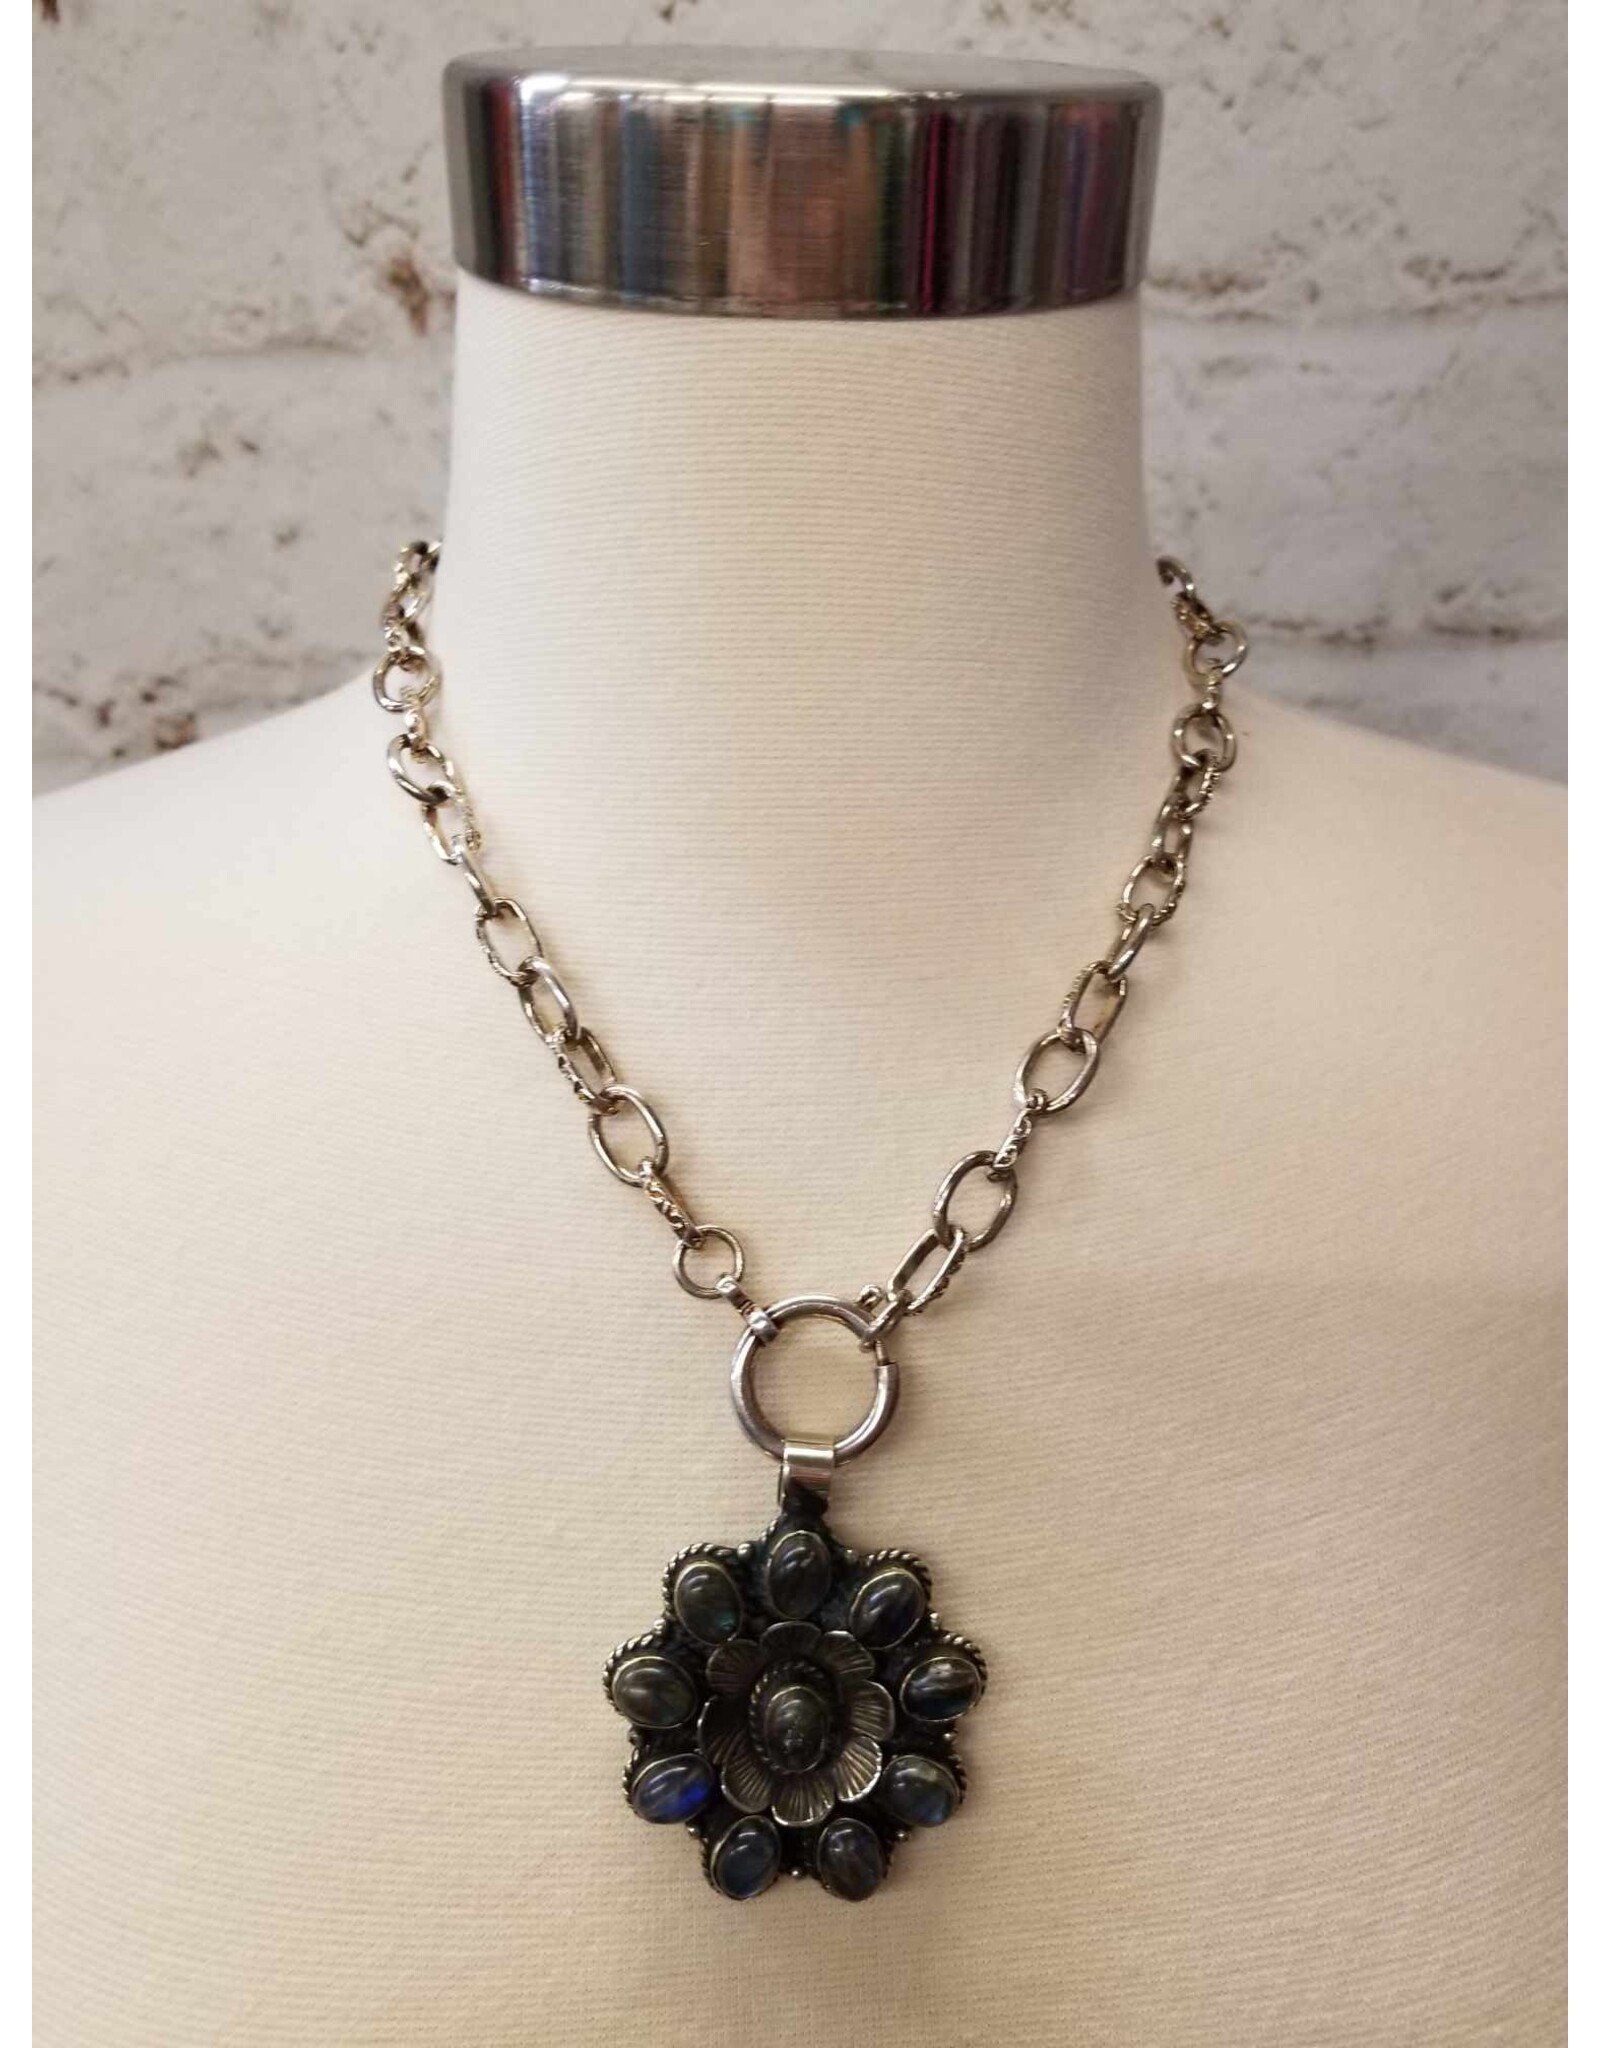 Erin Knight Designs Vintage Flower Pendant Necklace With Blue Stones